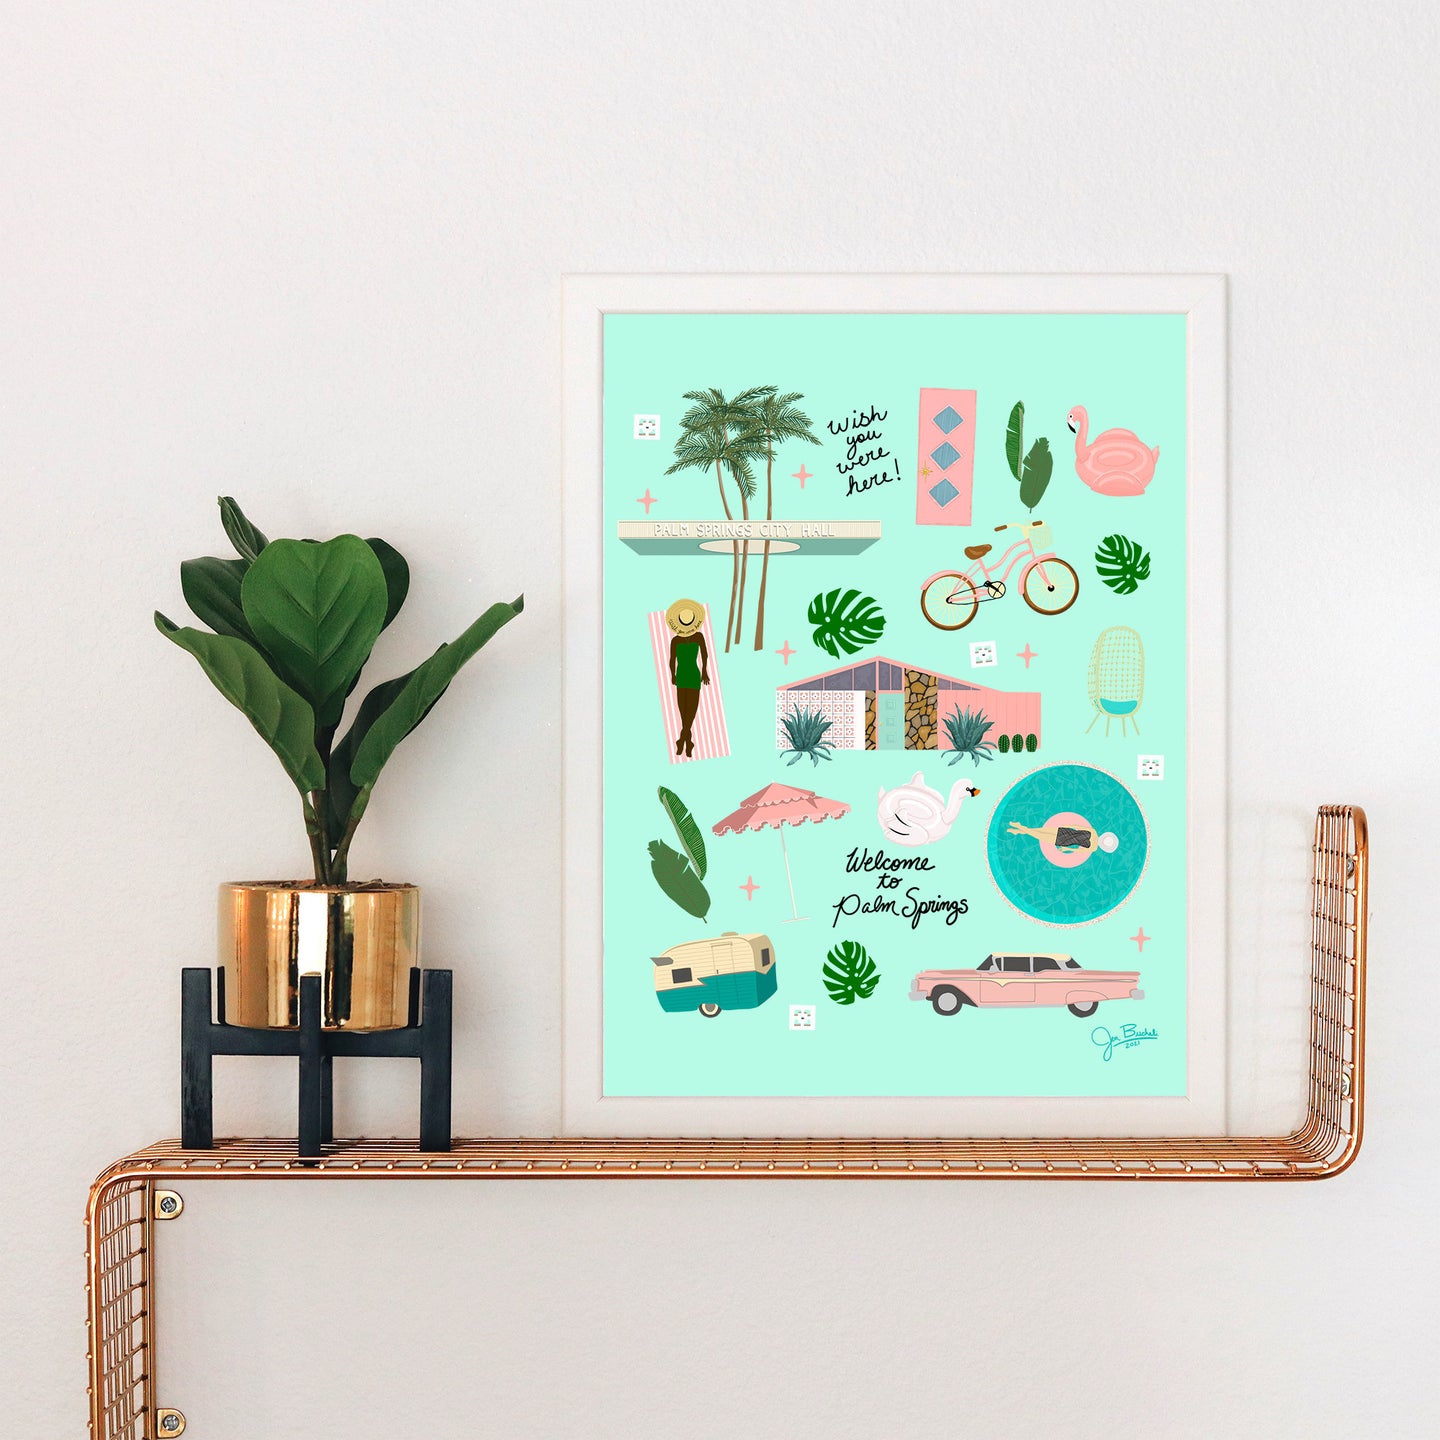 Welcome to Palm Springs Items Art Print